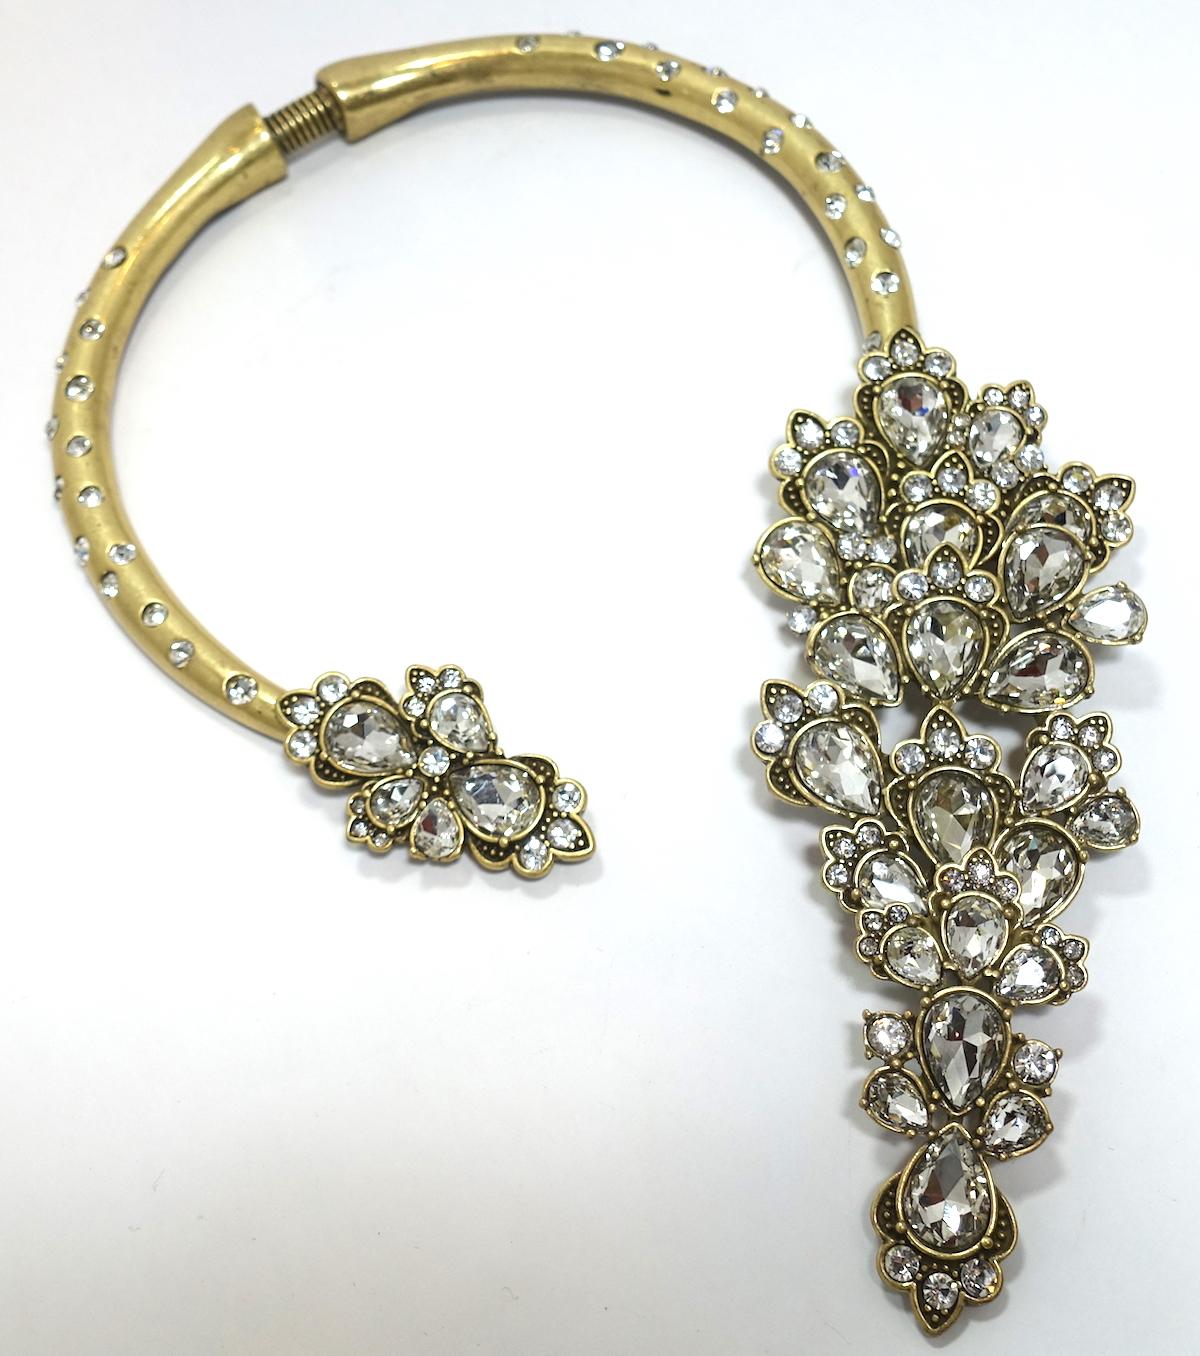 I have bought this Oscar necklace numerous times. It is so feminine with its asymmetric shape that wraps around the neck and has crystals throughout. The stones are made with sparkling crystals. This necklace measures 20” long x 2” at the widest